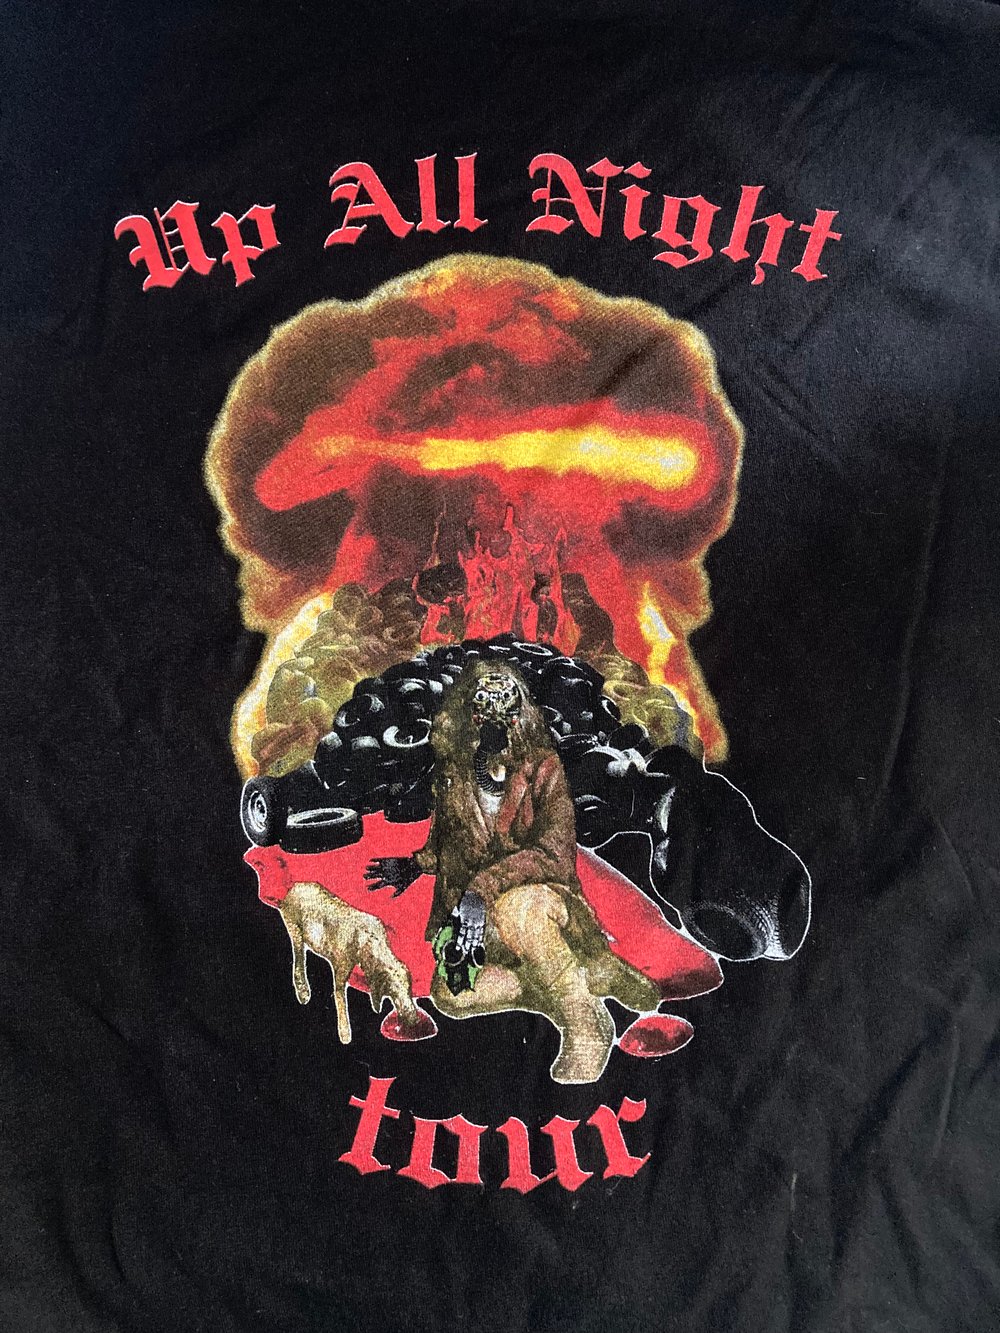 THE SPITS "UP ALL NGHT" 2 SIDED TOUR SHIRT, BLACK